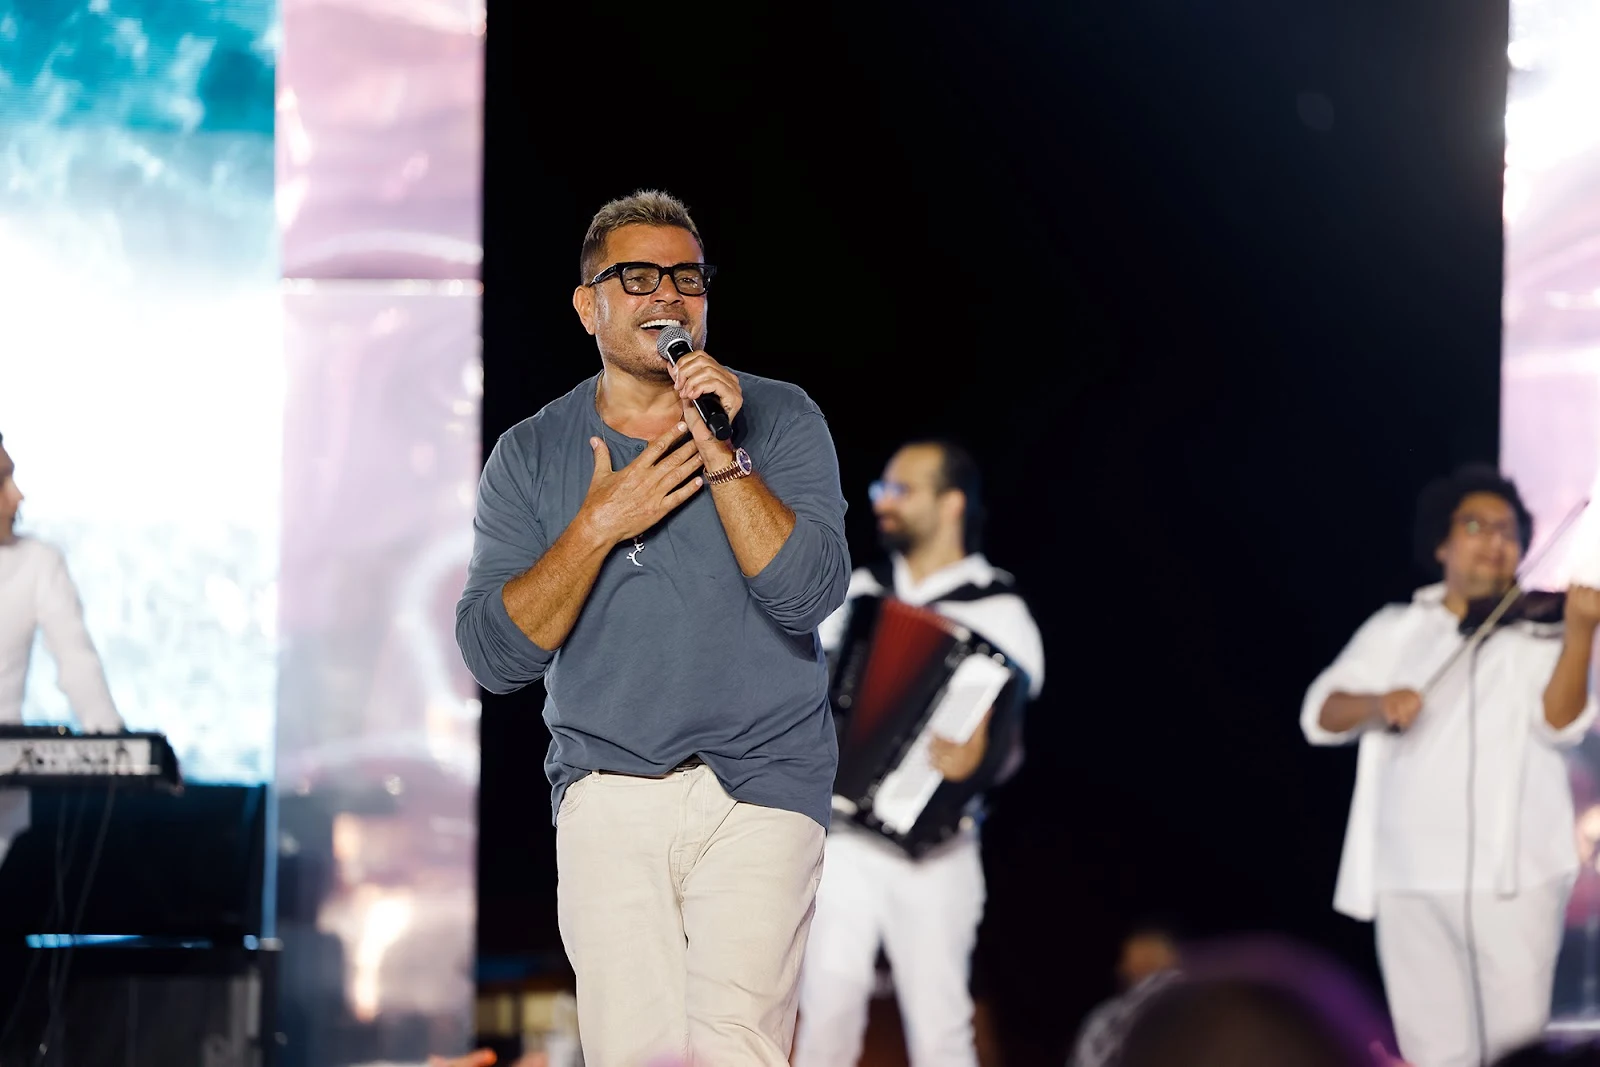 Amr Diab lit up the stage last night at Xanadu Makadi Bay #AmrDiab lit up the stage last night at Xanadu Makadi Bay🔥! Check out these snippets from the show and relive the magic.  Photography: Mahmoud Loutfy